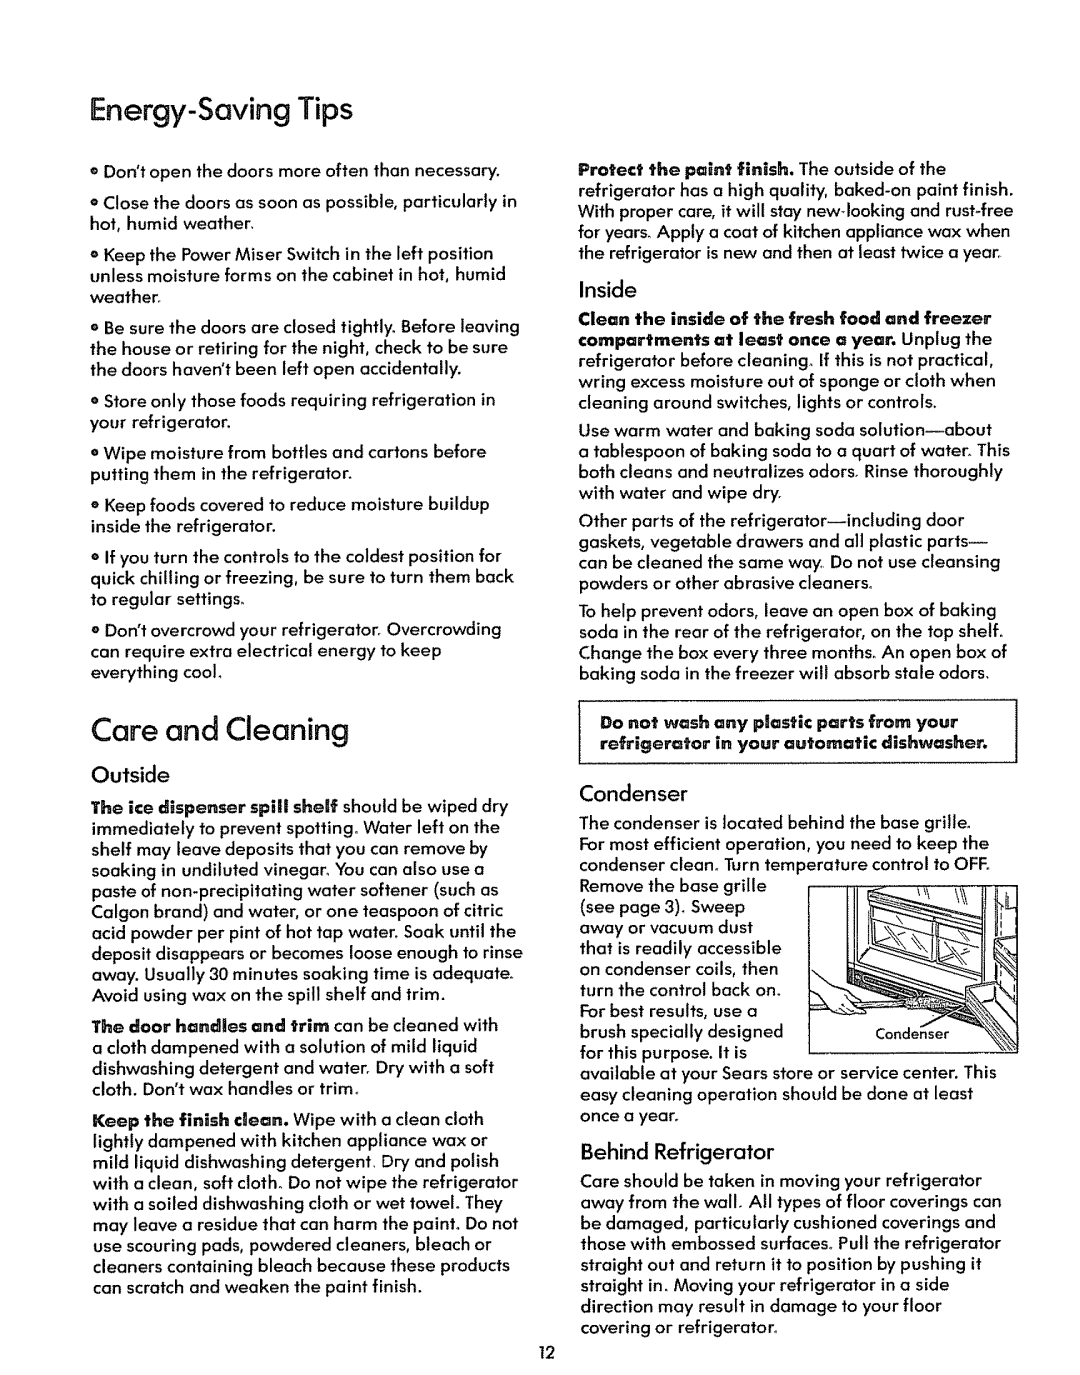 Sears 71281, 71579 Care and Cleaning, Energy-SavingTips, Outside, Inside, Condenser, Behind Refrigerator, refrigerator 